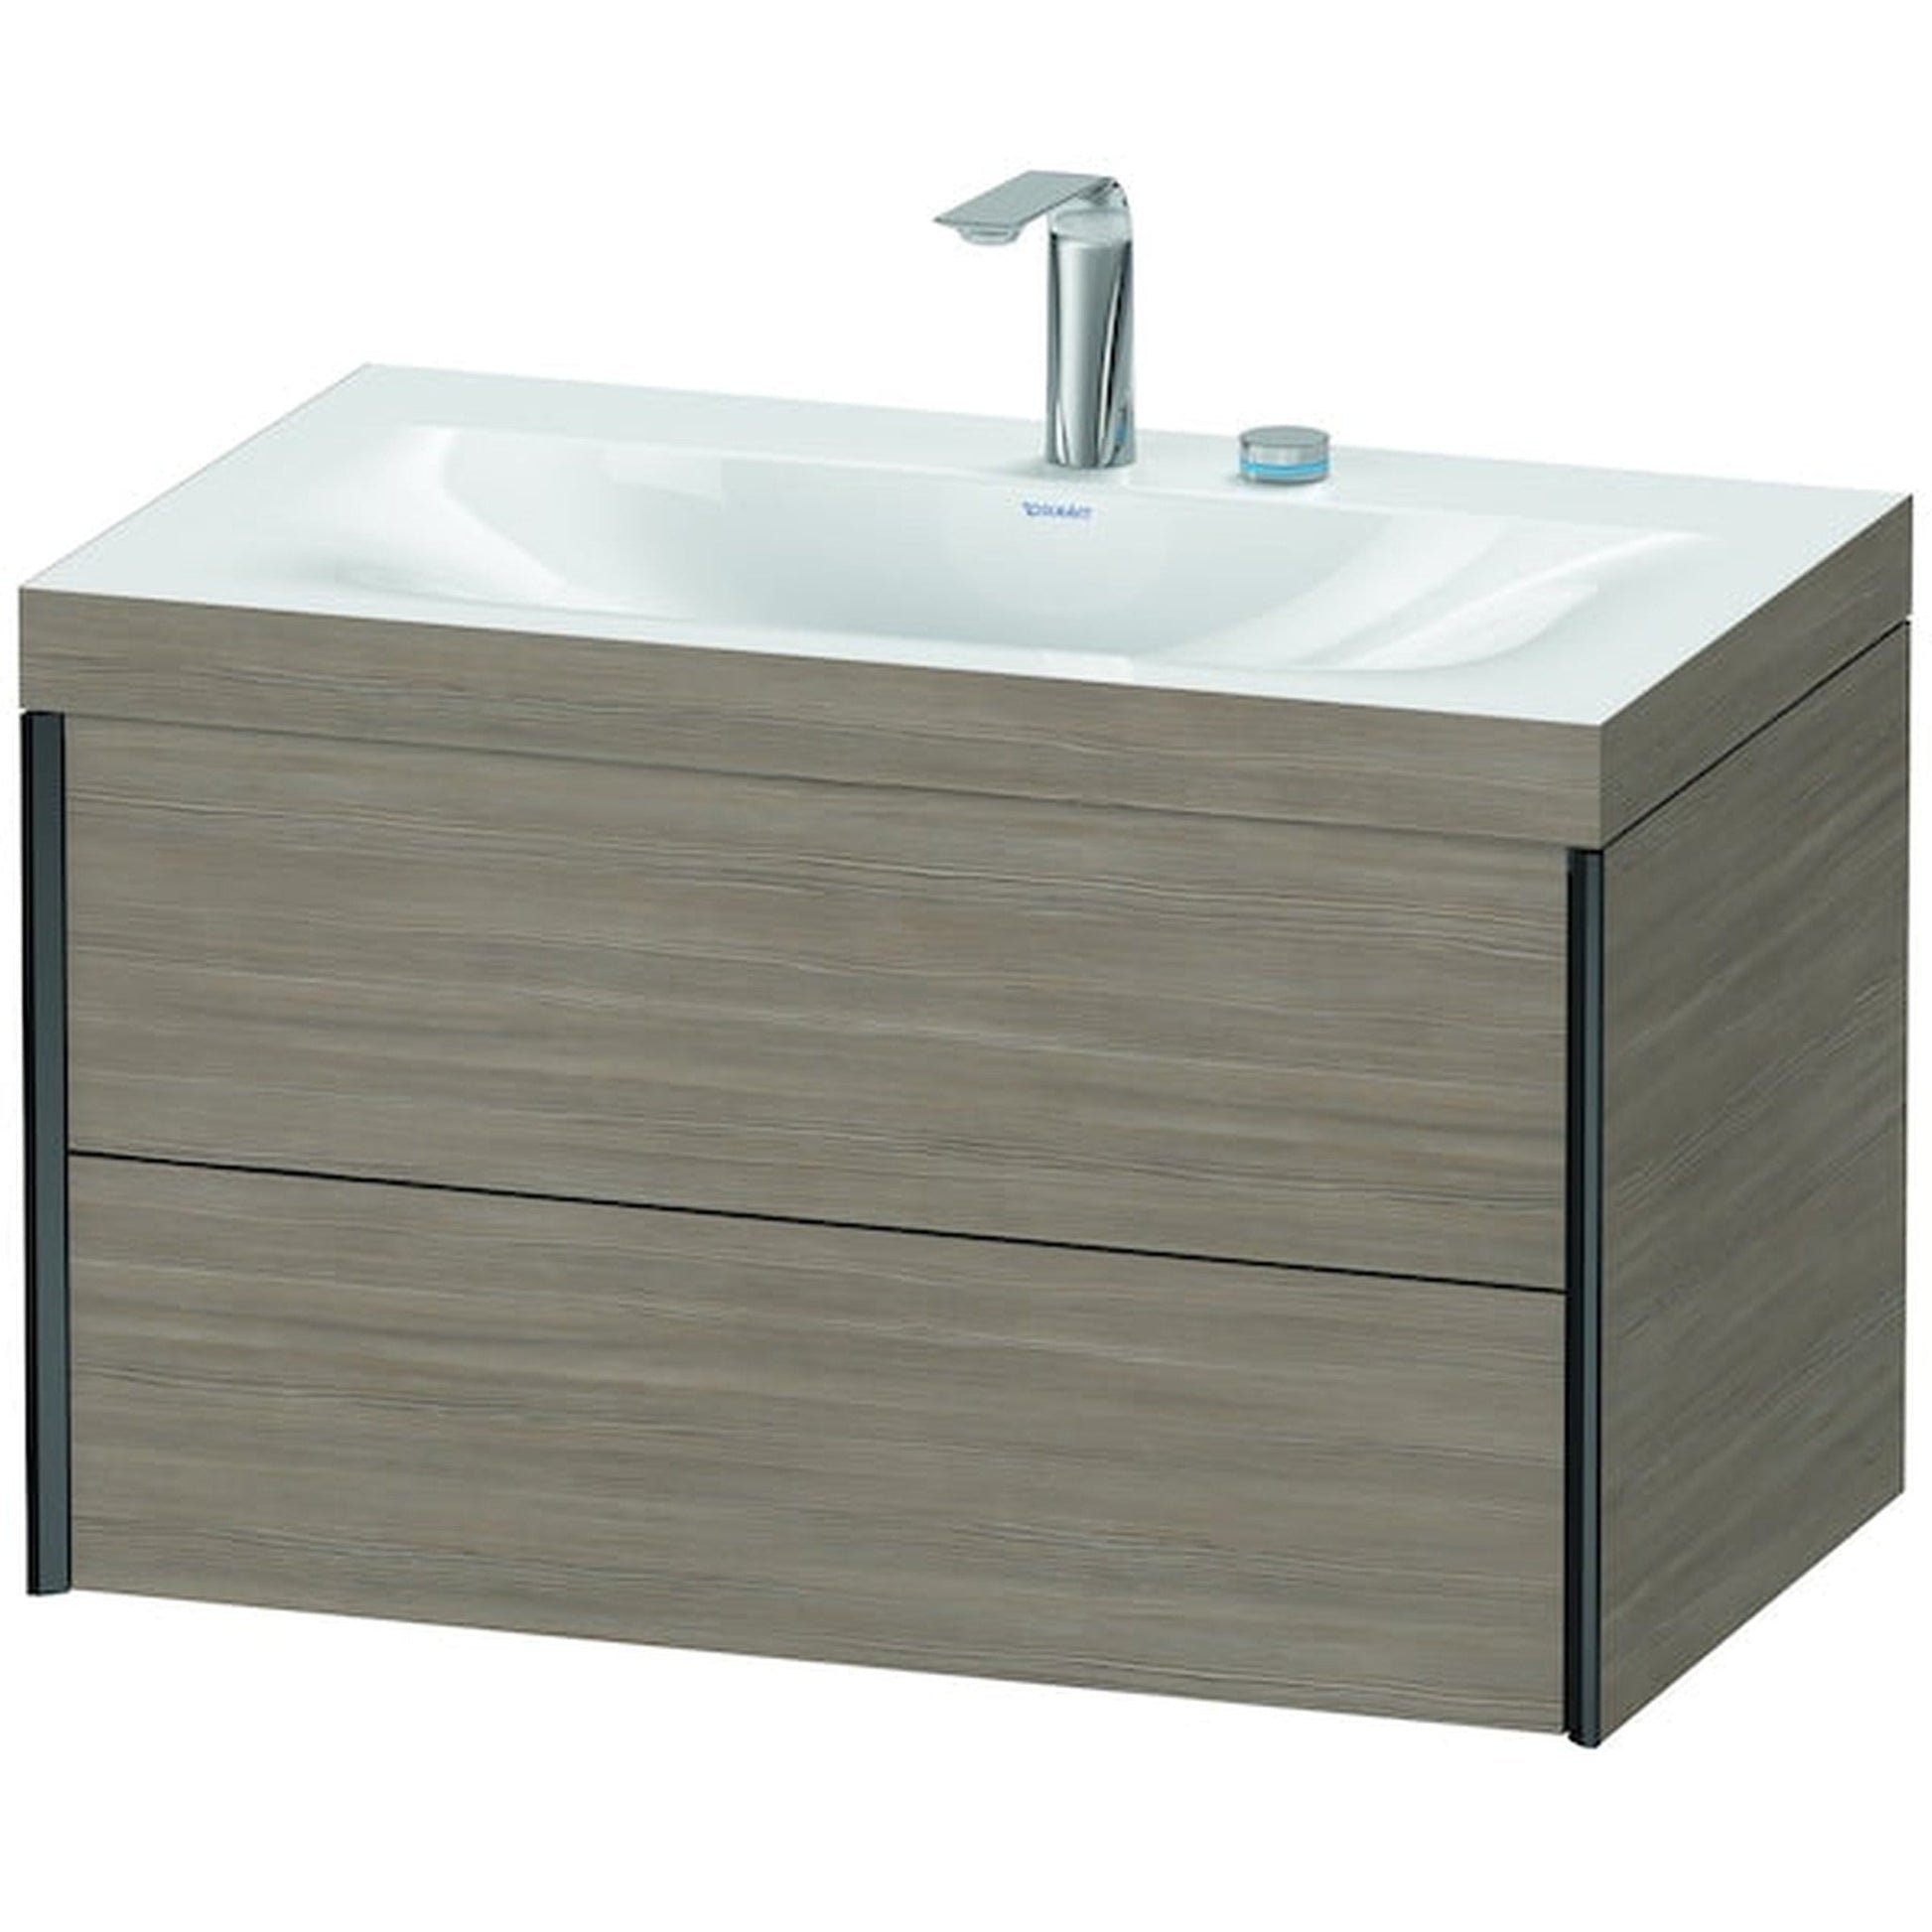 Duravit Xviu 31" x 20" x 19" Two Drawer C-Bonded Wall-Mount Vanity Kit With Two Tap Holes, Silver Pine (XV4615EB231C)